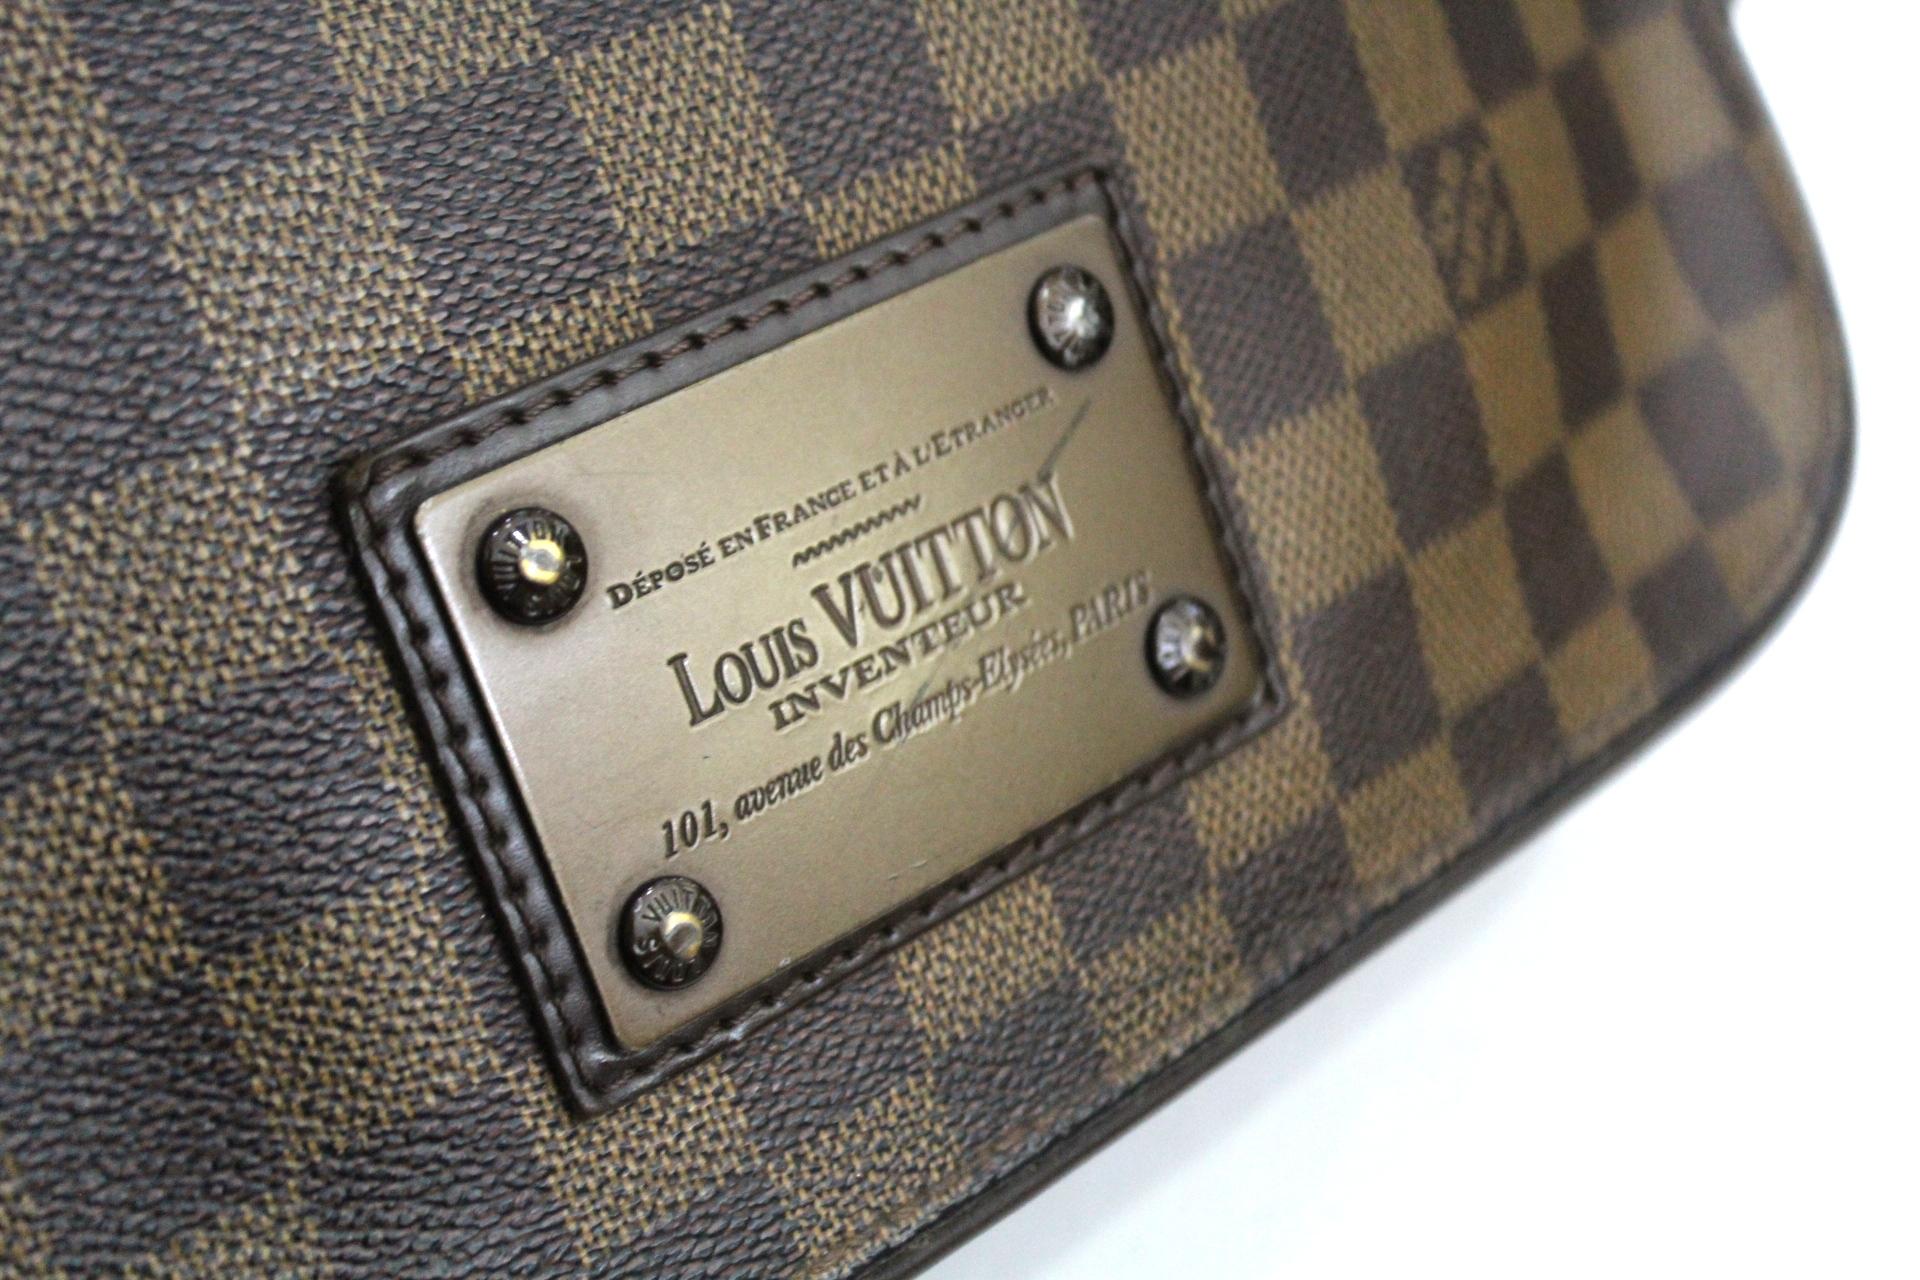 This Louis Vuitton Damier Canvas Brooklyn GM Bag is made for anyone with impeccable taste who has an affinity for utilitarian design. This bag has the classic messenger bag shape and is perfect for carrying documents and a laptop. It features a